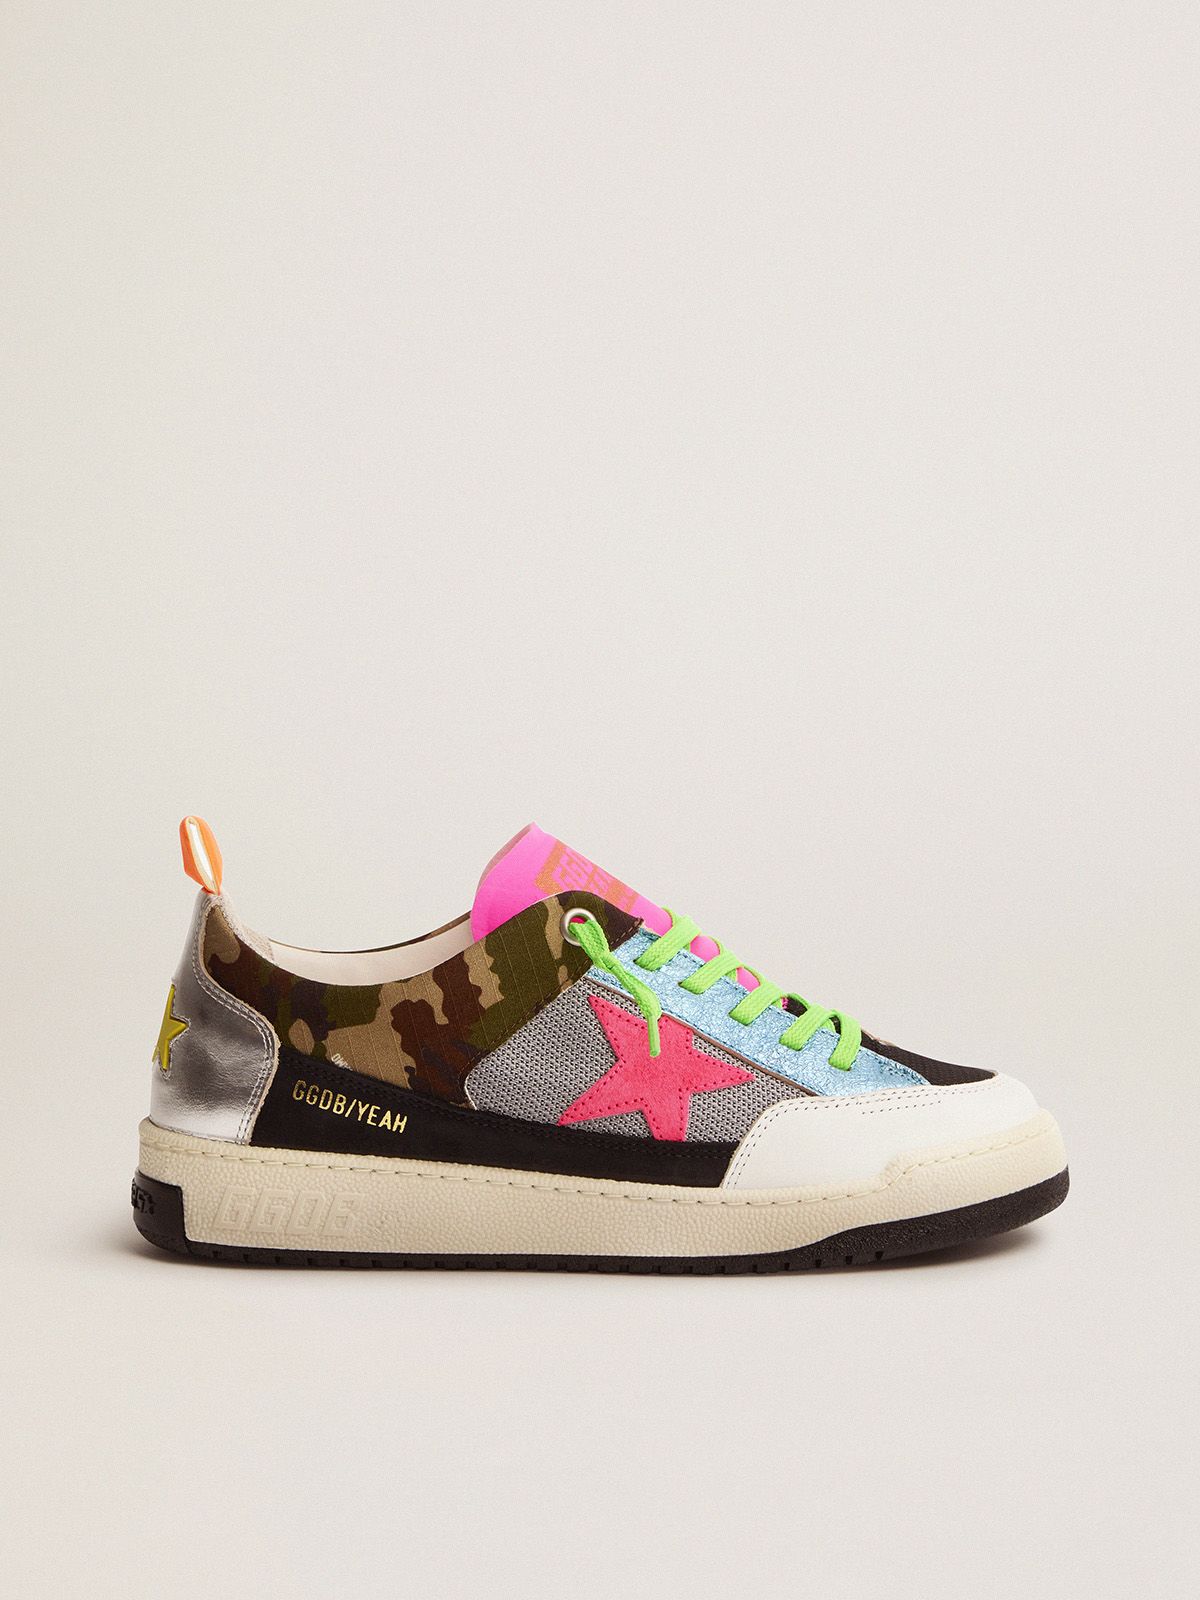 golden goose with camouflage Women’s sneakers fuchsia Yeah star